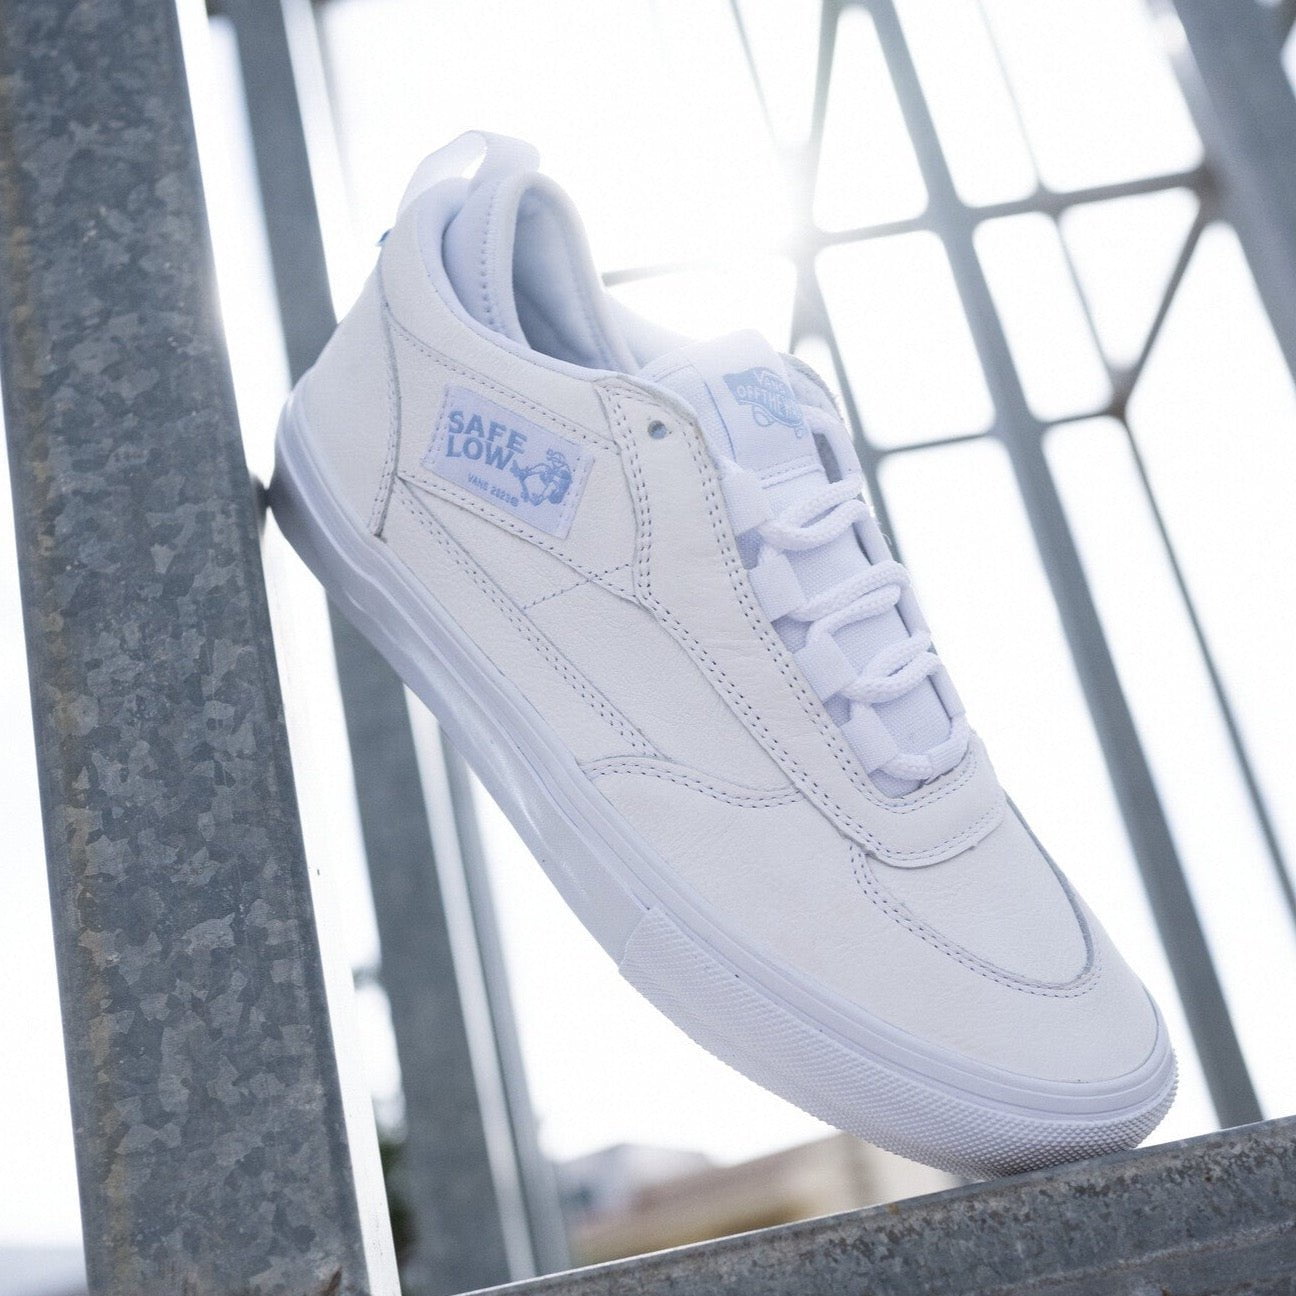 Vans Safe Low Skate Shoes Rory White